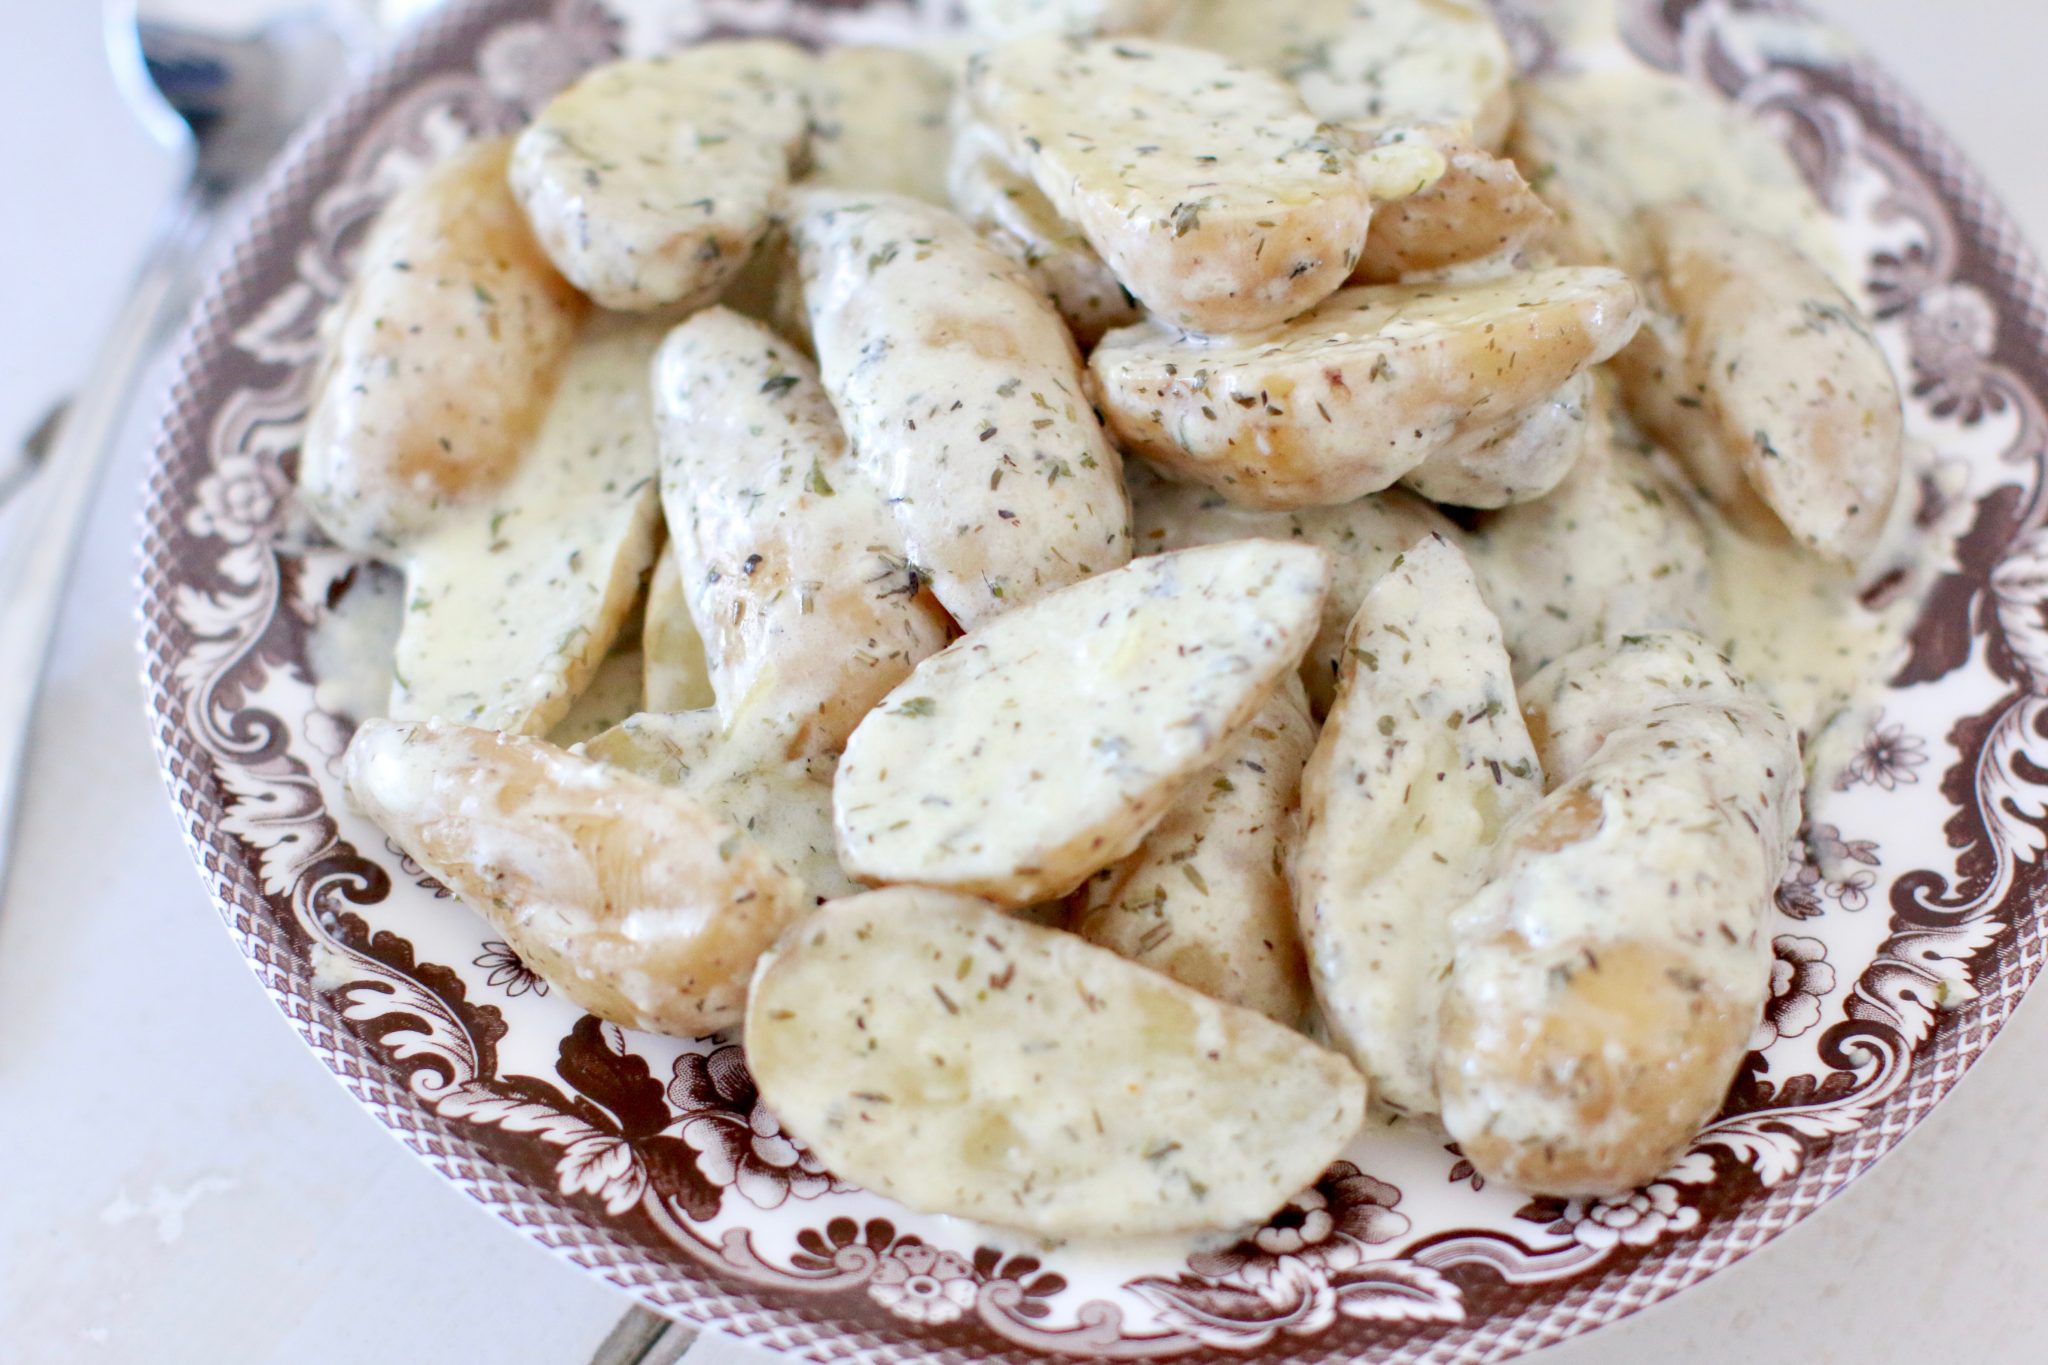 Fingerling potatoes covered in a creamy sauce.